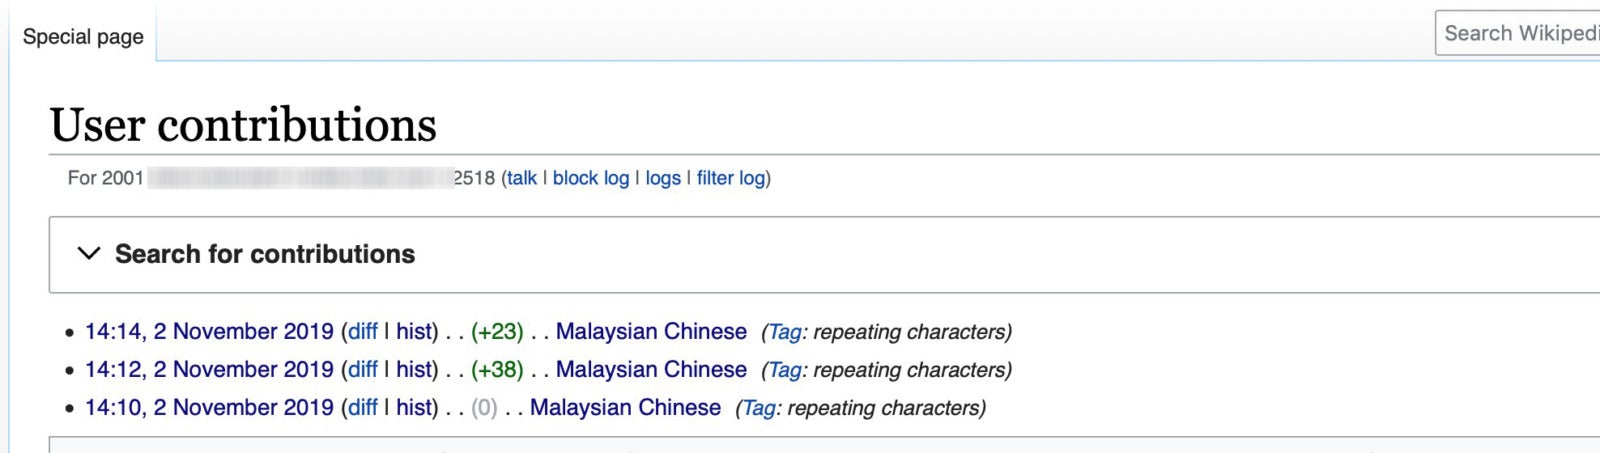 Someone Vandalised the Wikipedia Page Describing "Malaysian Chinese" & Called Them Haram - WORLD OF BUZZ 5